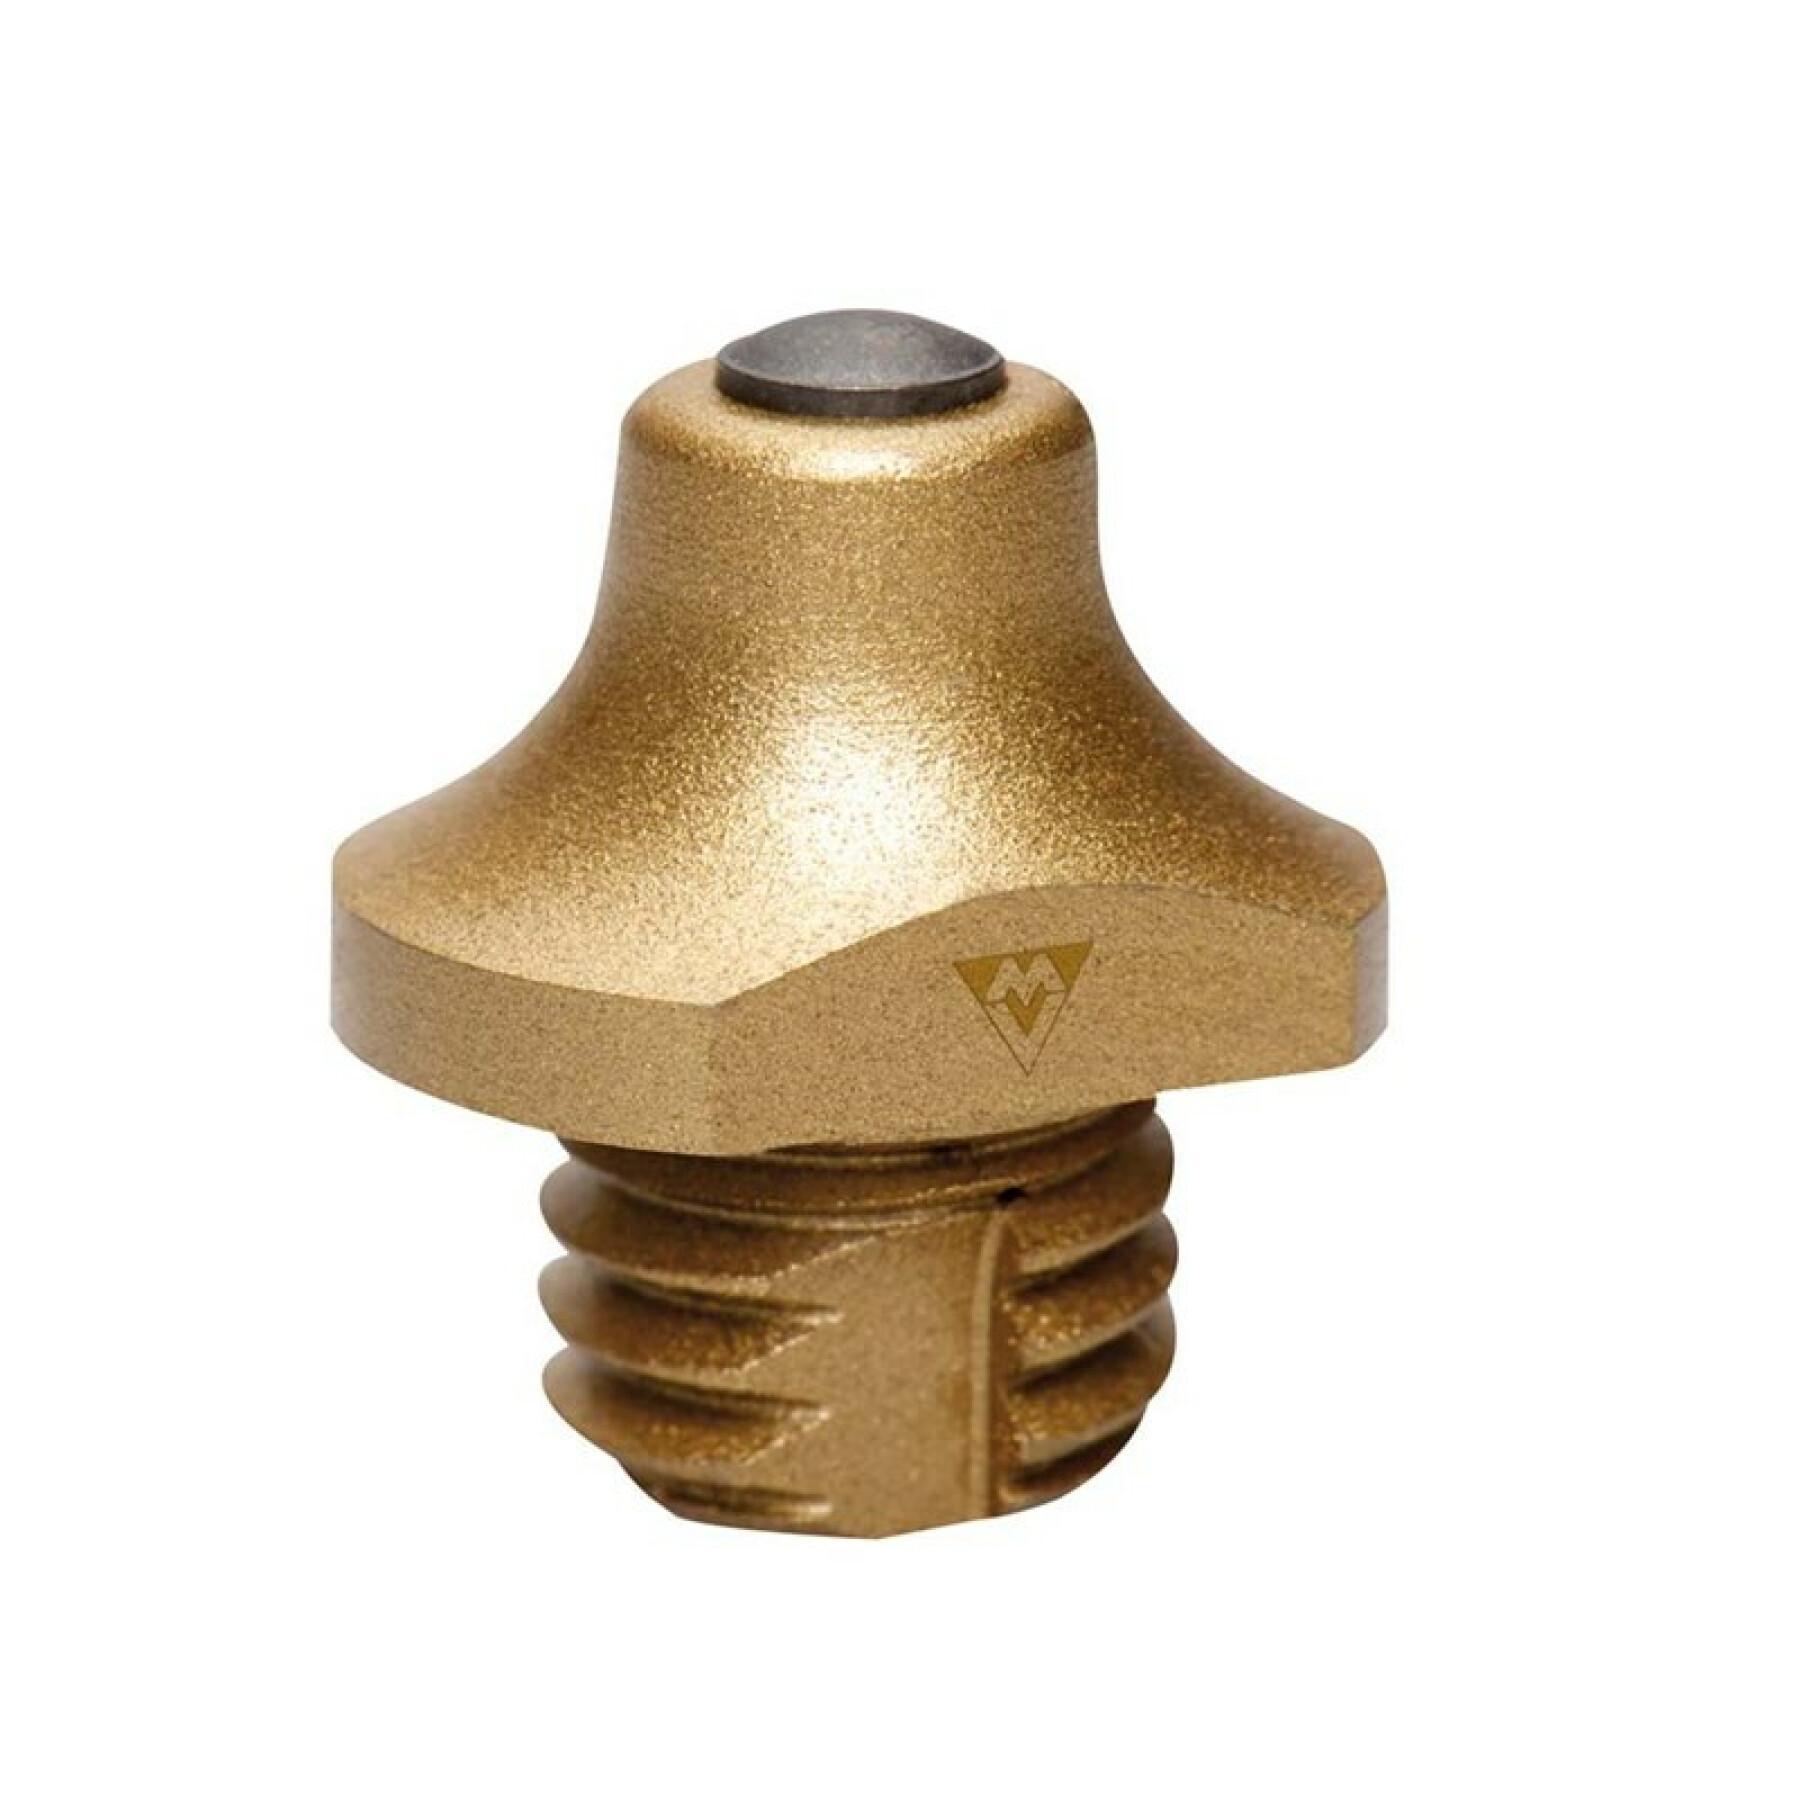 Self-cleaning tungsten spike Vaillant Fastuds SG 10 mm